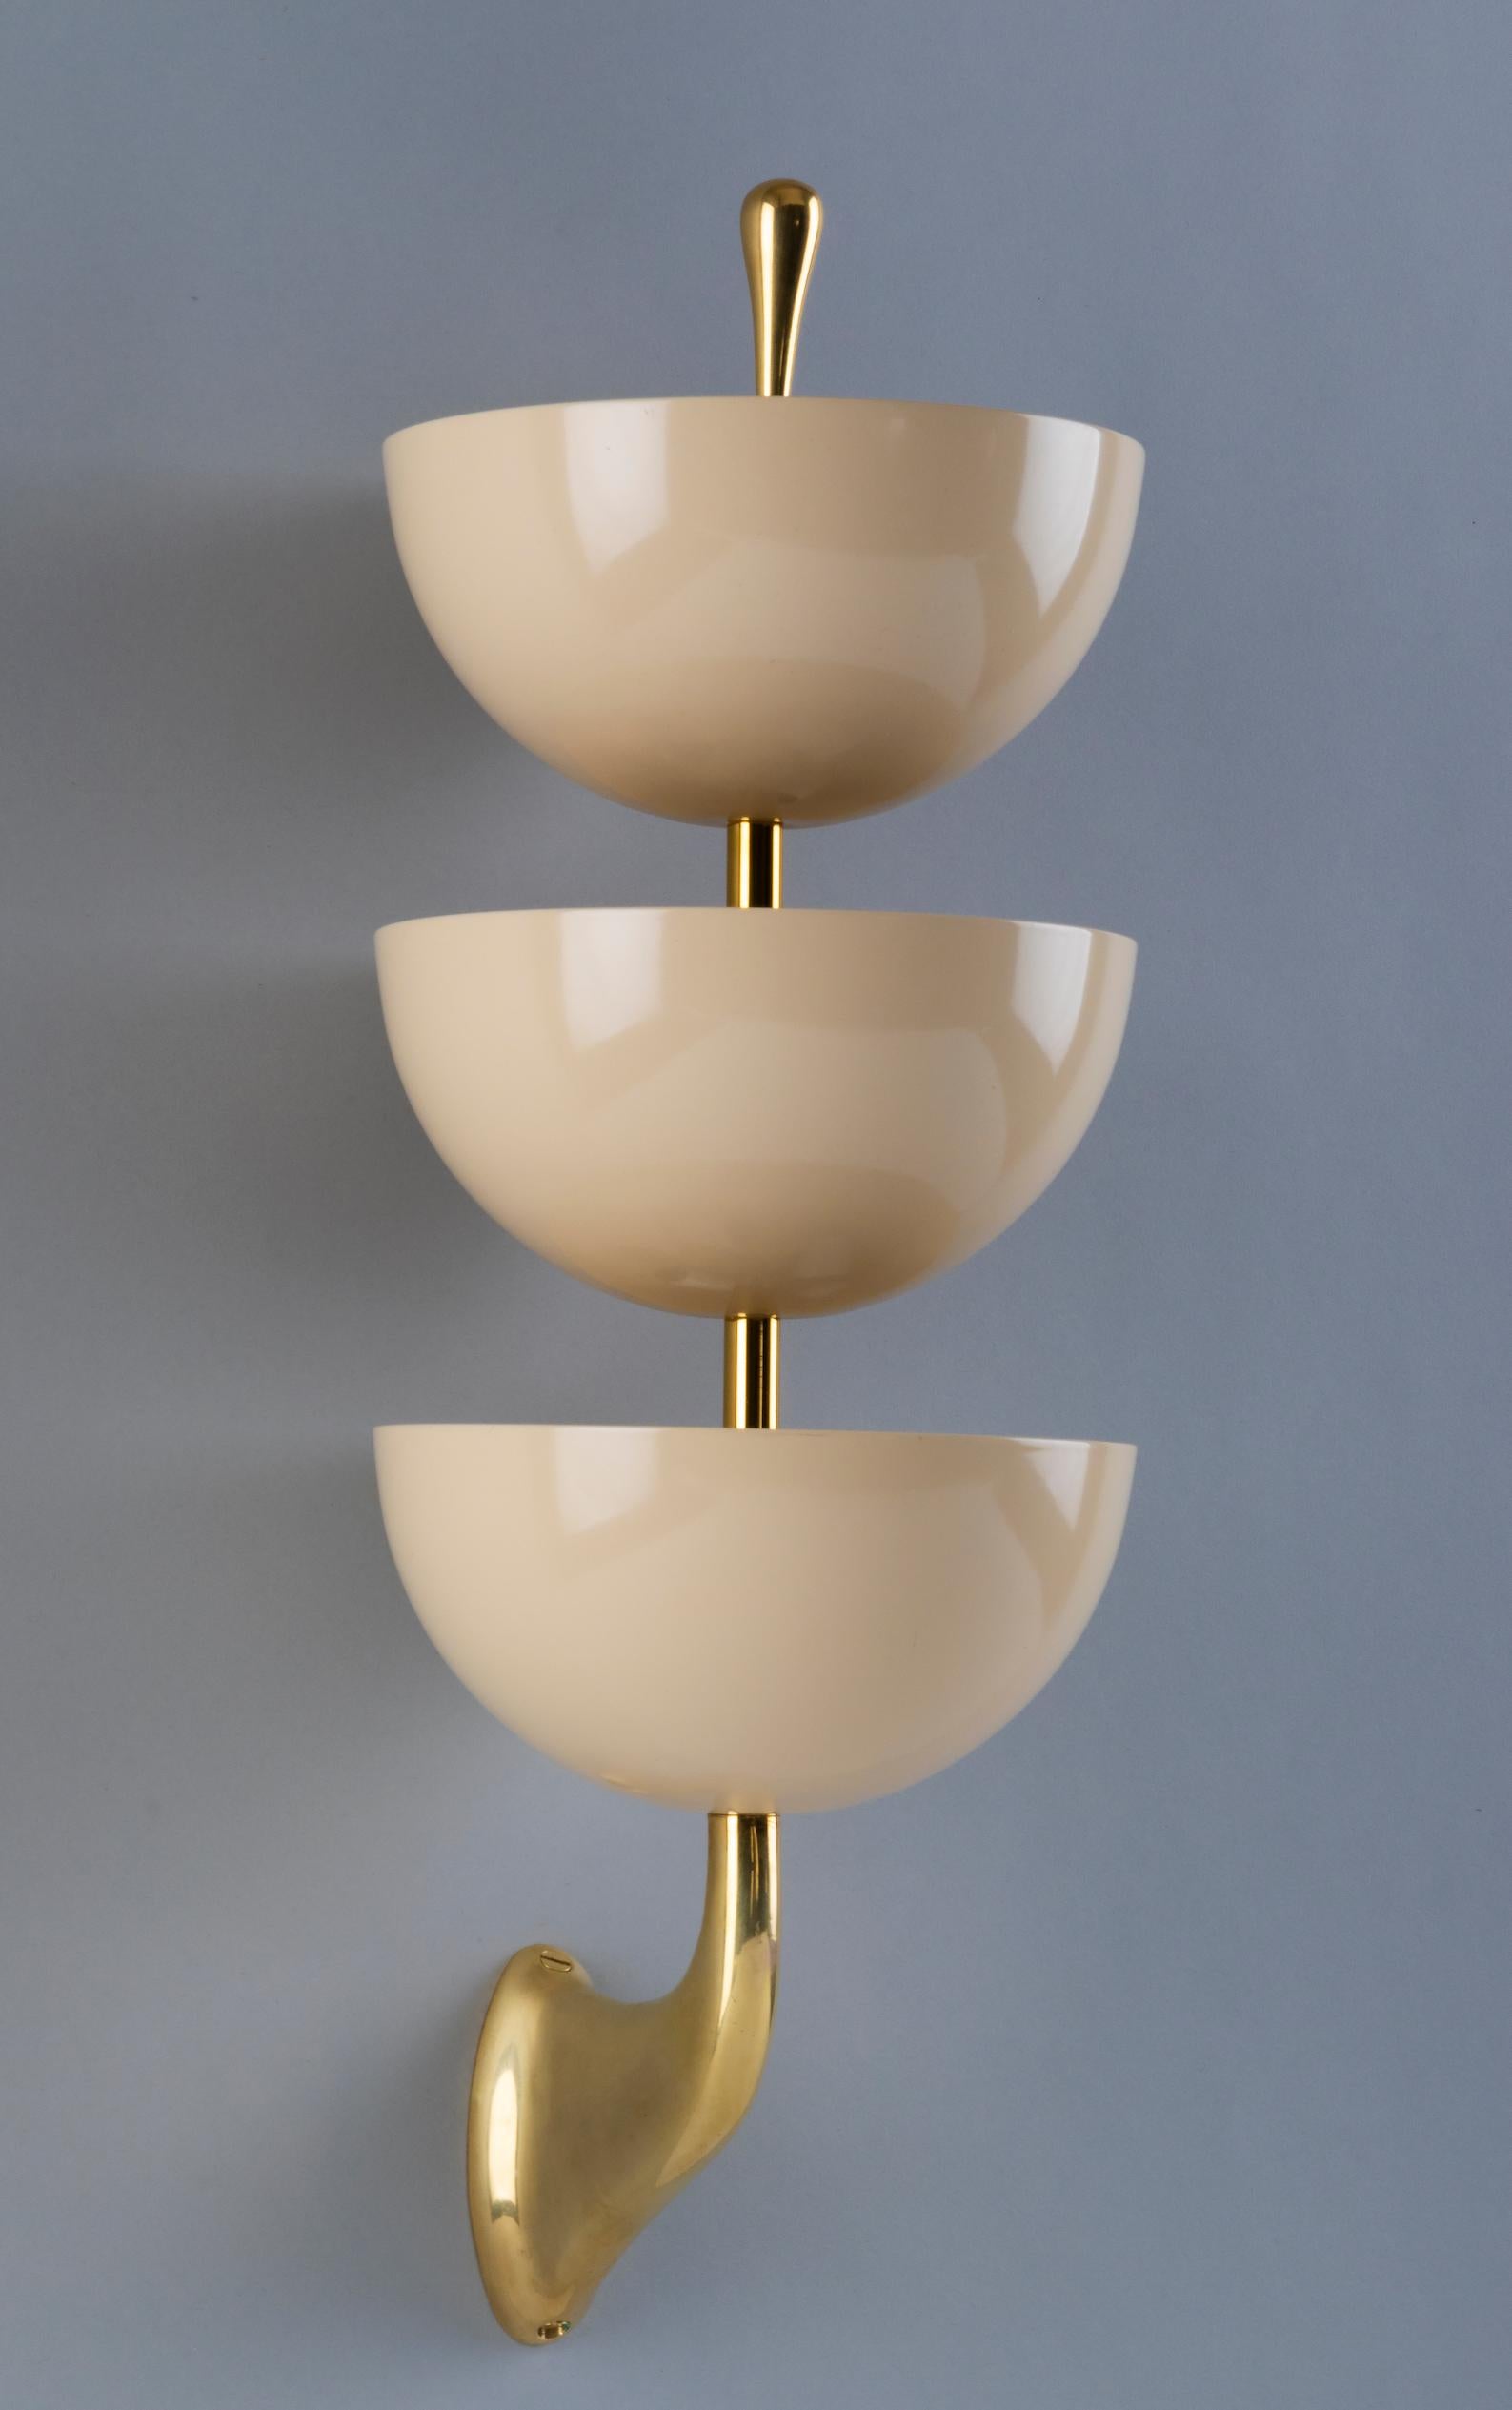 Mid-20th Century Exquisite Pair of Tiered White Enamel and Brass Sconces by Stilnovo, Italy 1950s